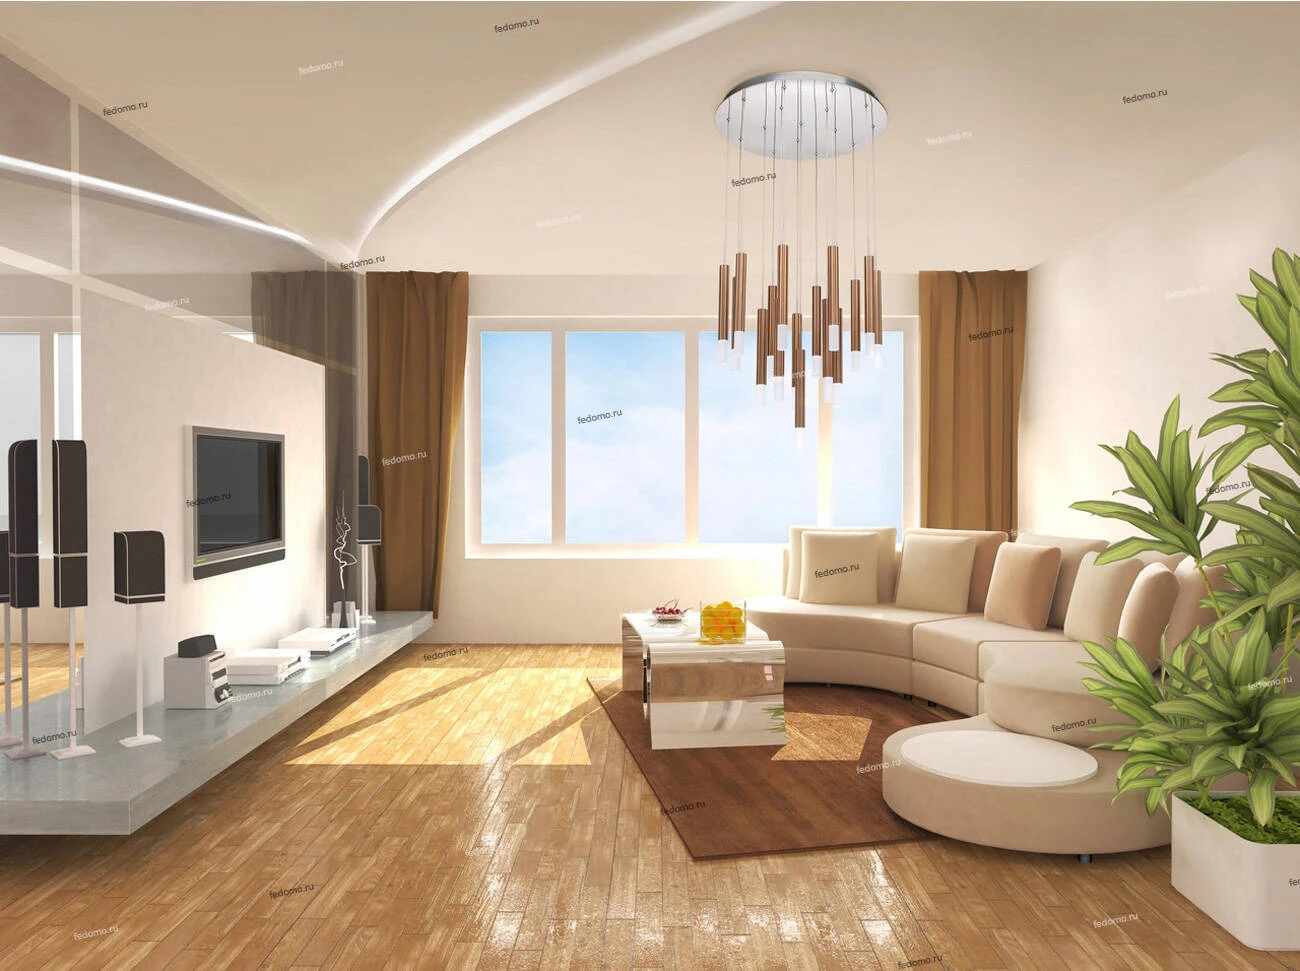 Creative False Ceiling Lights Design to Elevate Your Space - Queens Decor